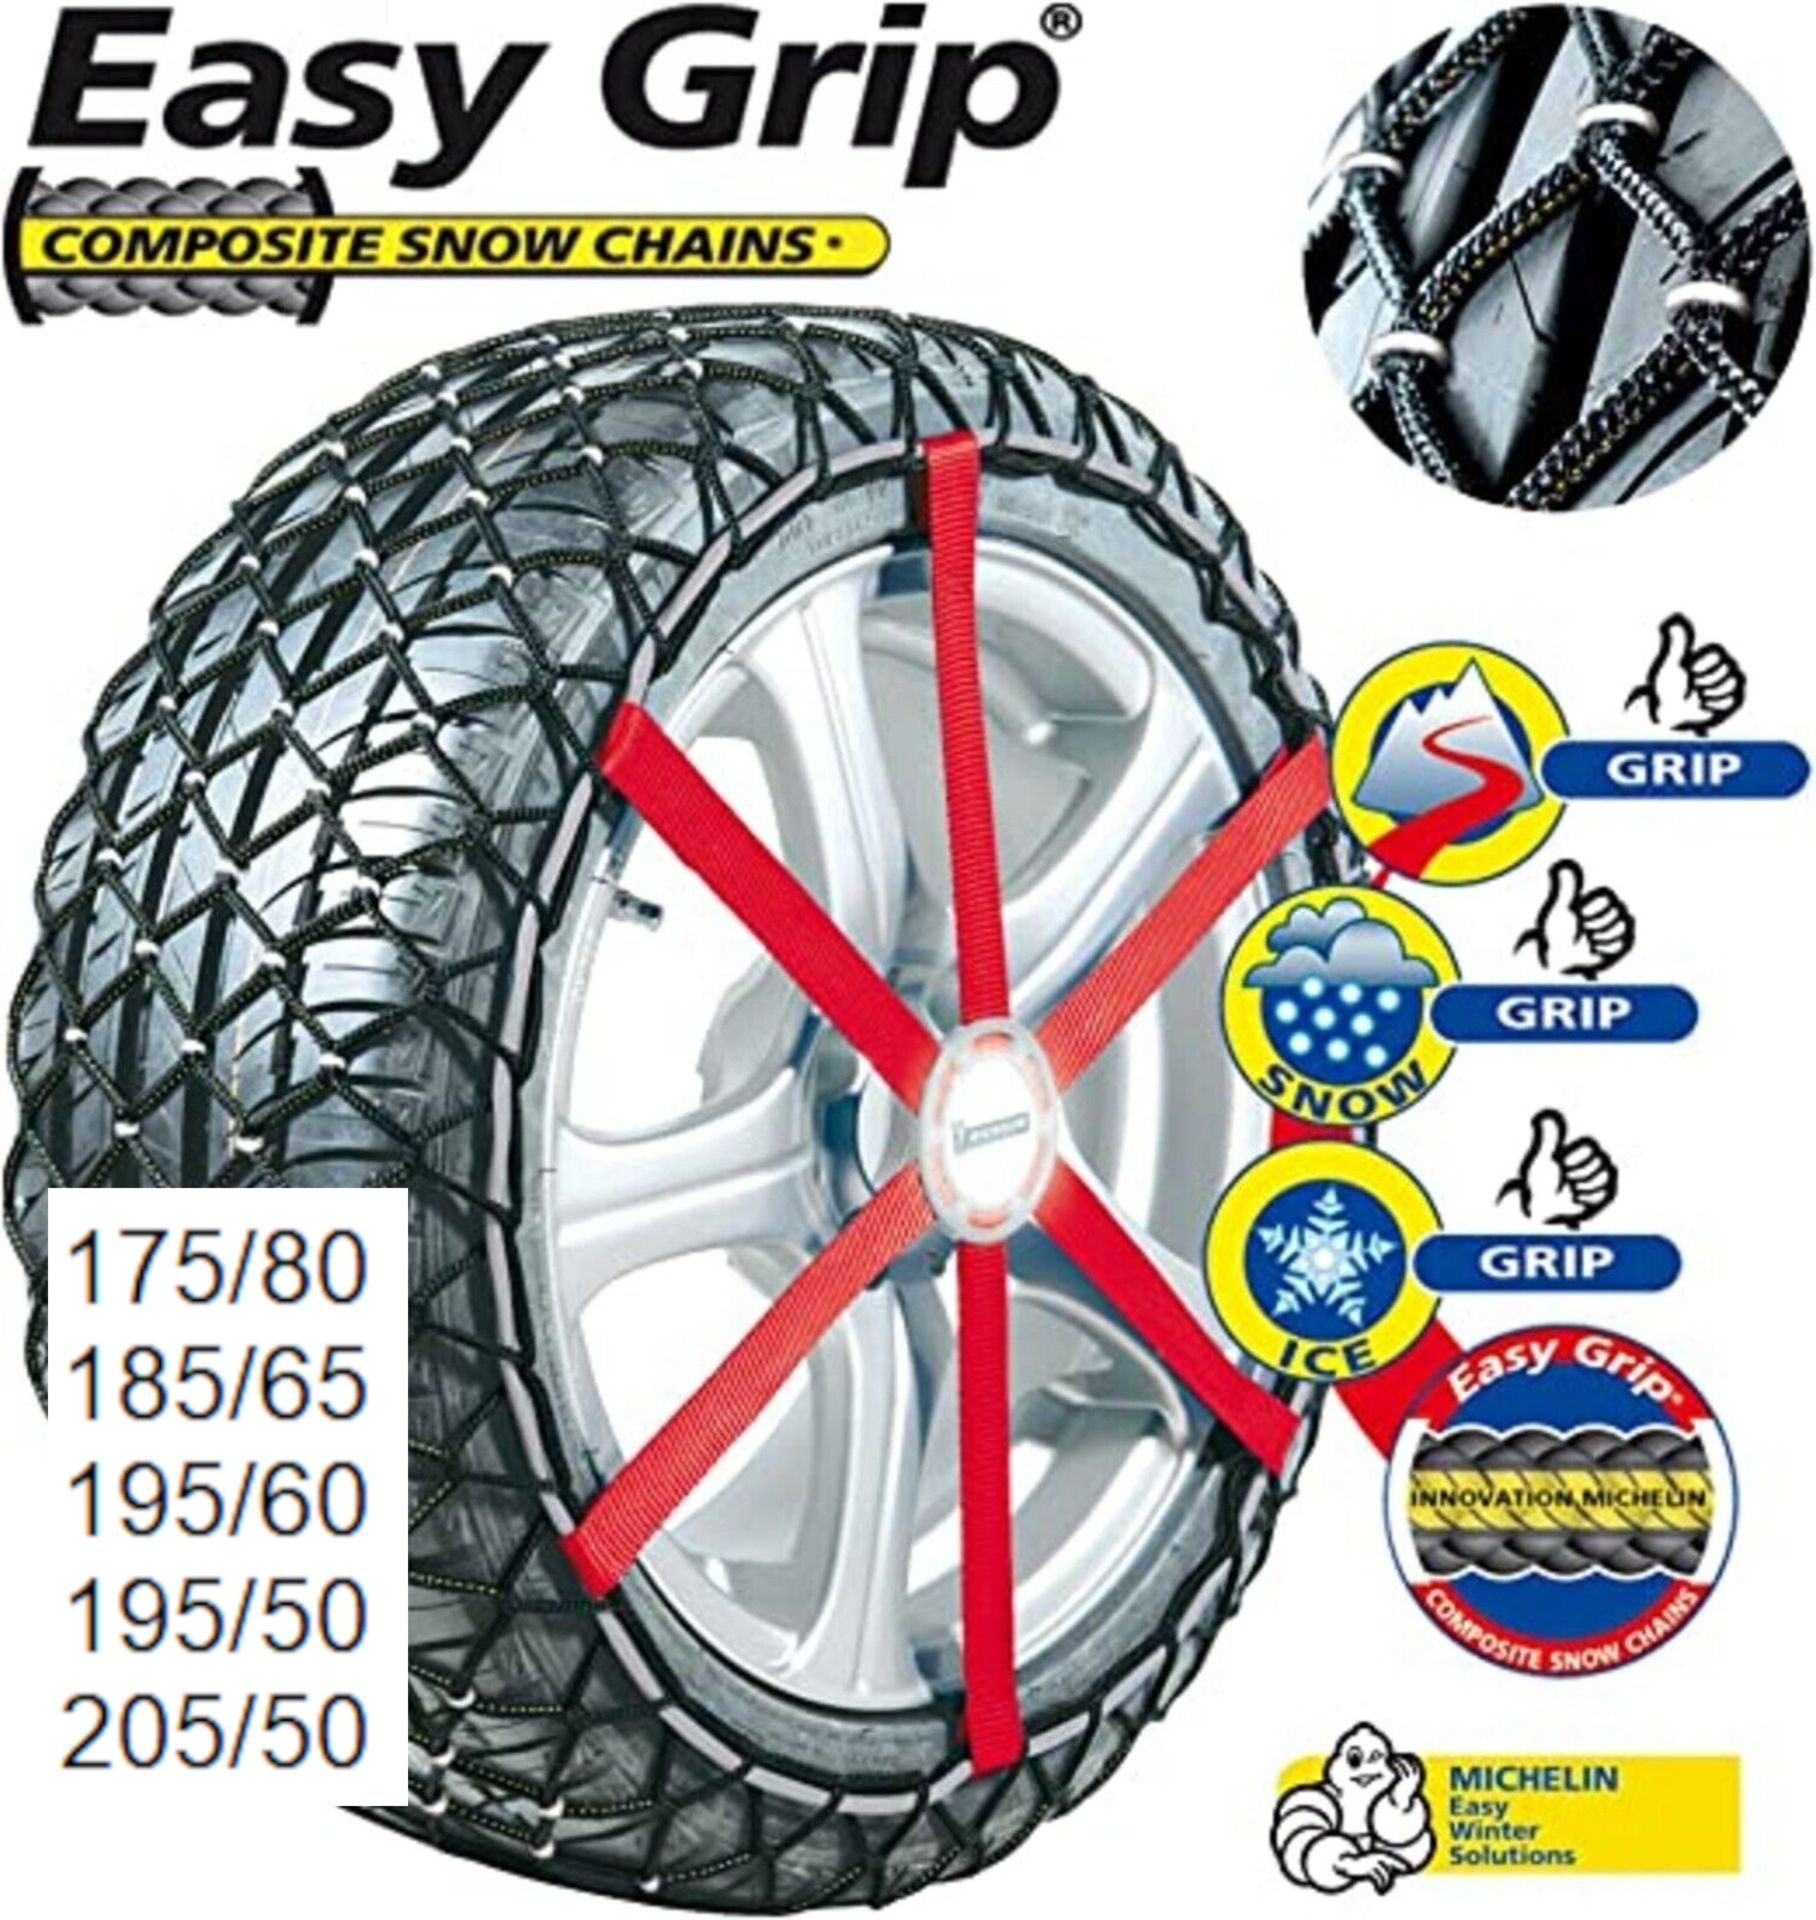 10 X MICHELIN 2 EASY GRIP SNOW CHAINS G13 7900 165/70/14 185/60/14 TYRES - RRP £350